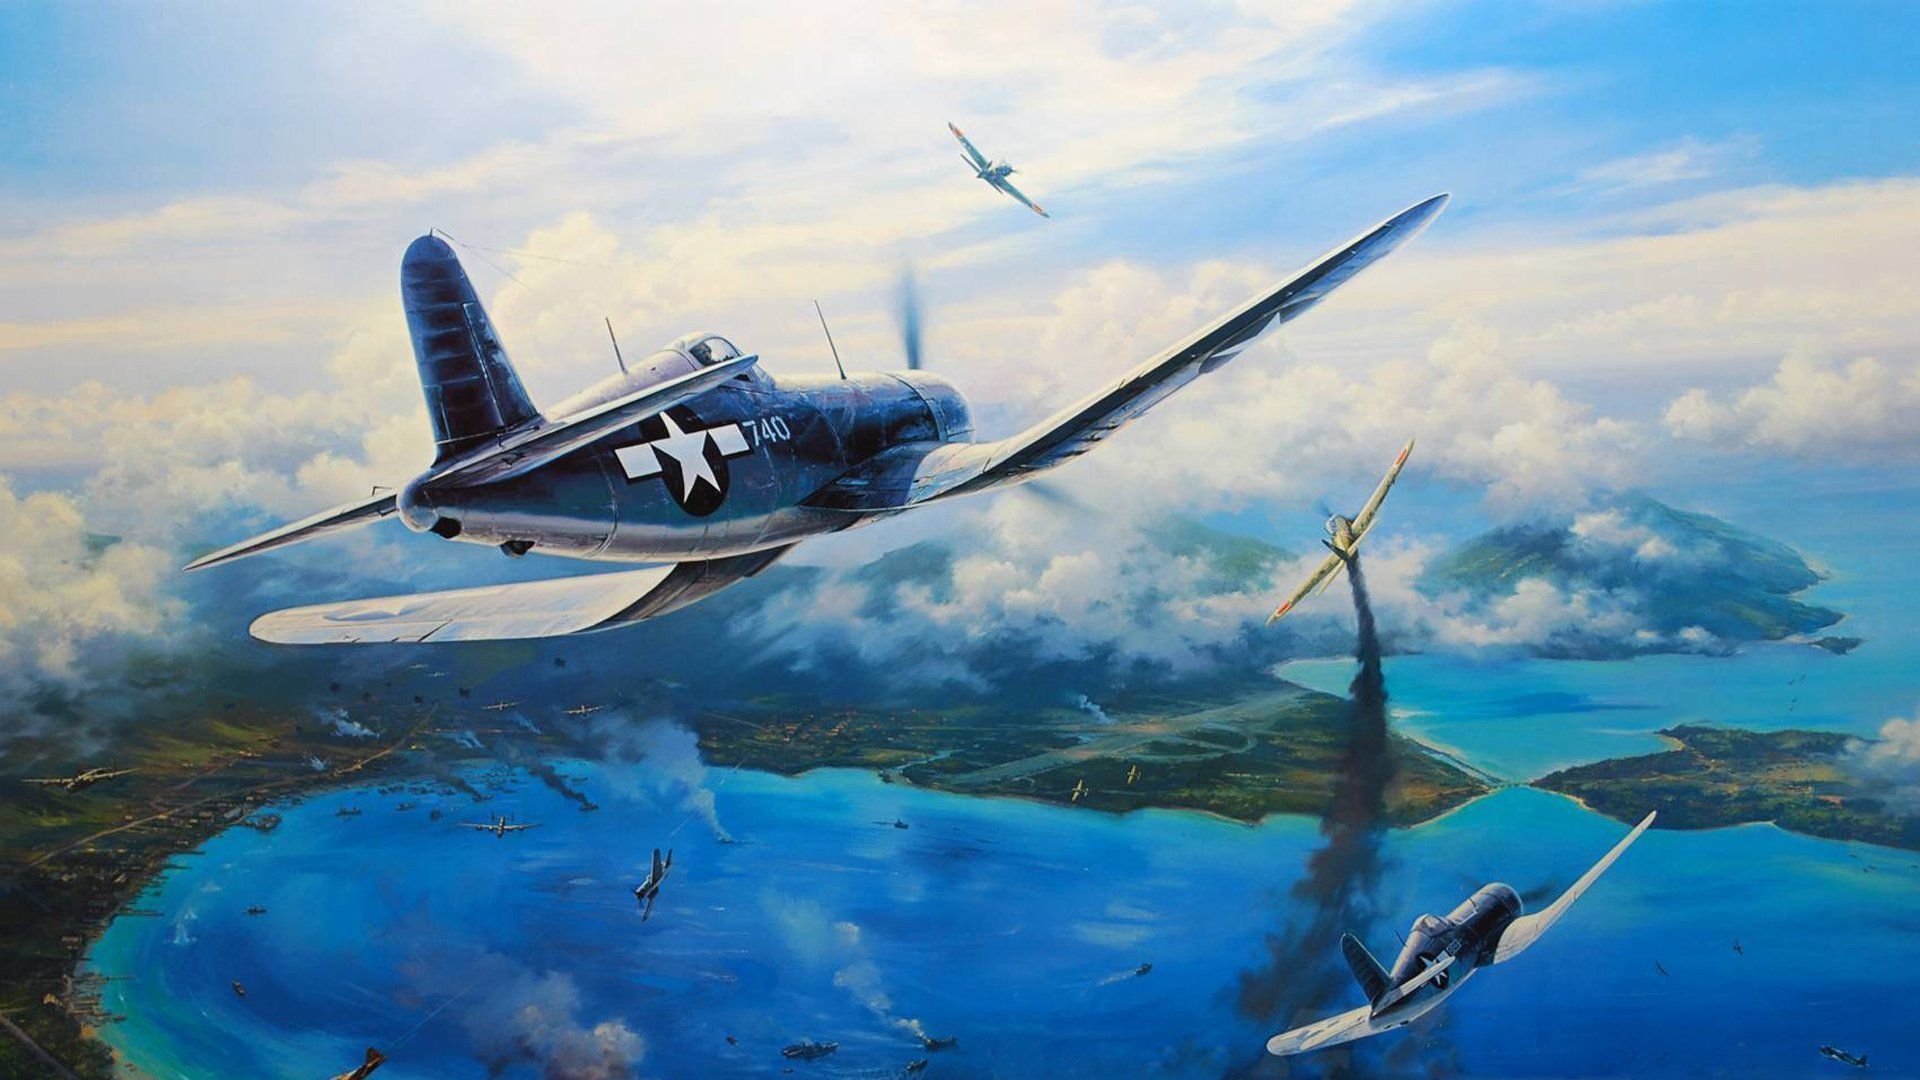 F4u corsair aircraft carrierbased fighter pilot sky military retro vintage  wallpaper  2560x1440  433557  WallpaperUP